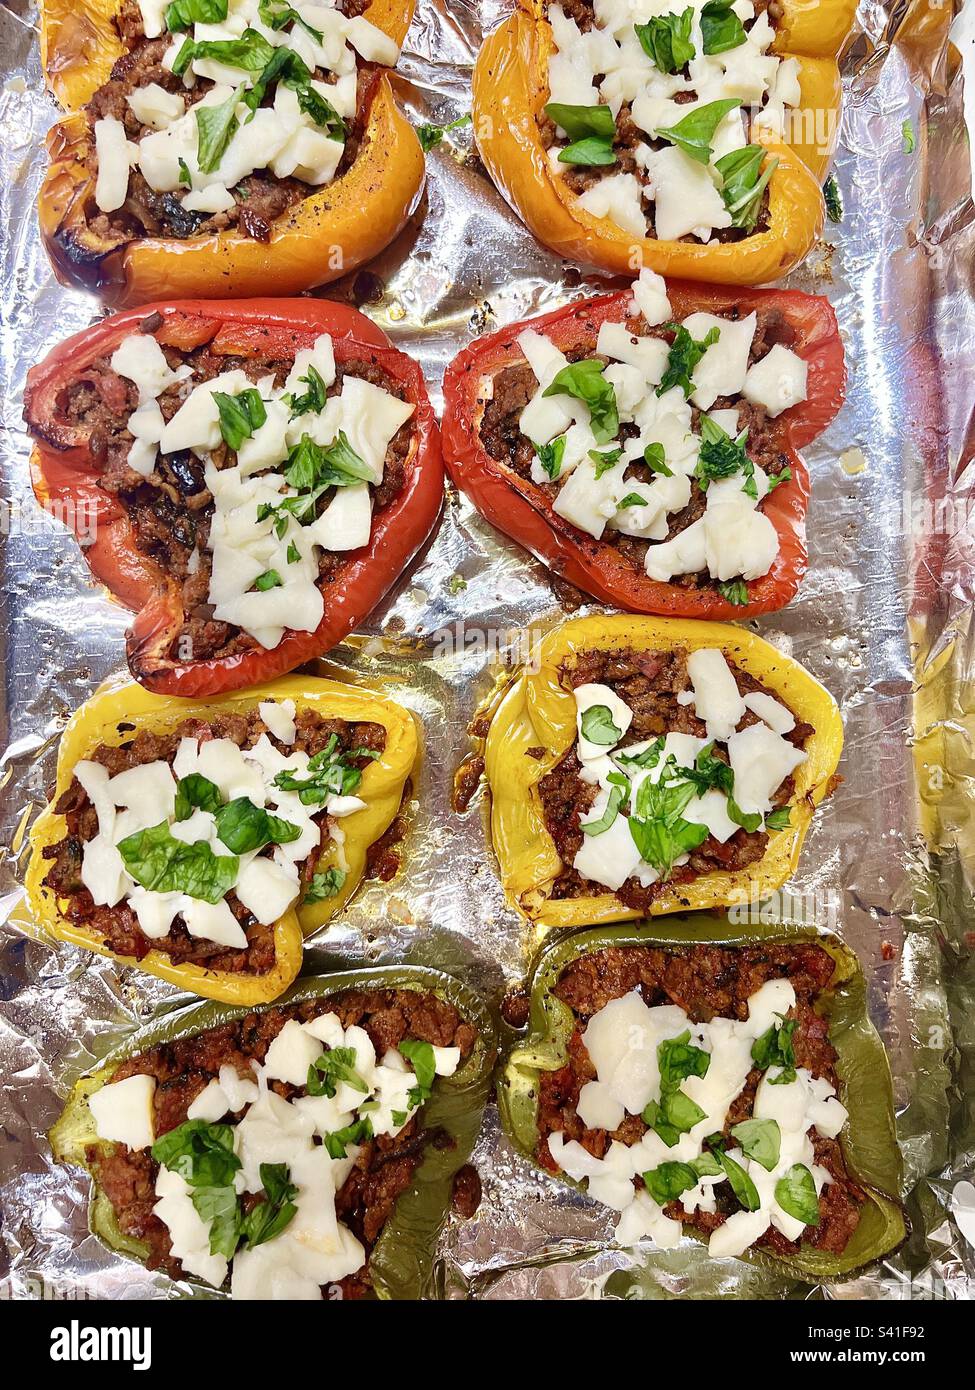 Stuffed bell peppers (Capsicum annuum) with ground minced beef cheese and herbs ready for roasting Stock Photo